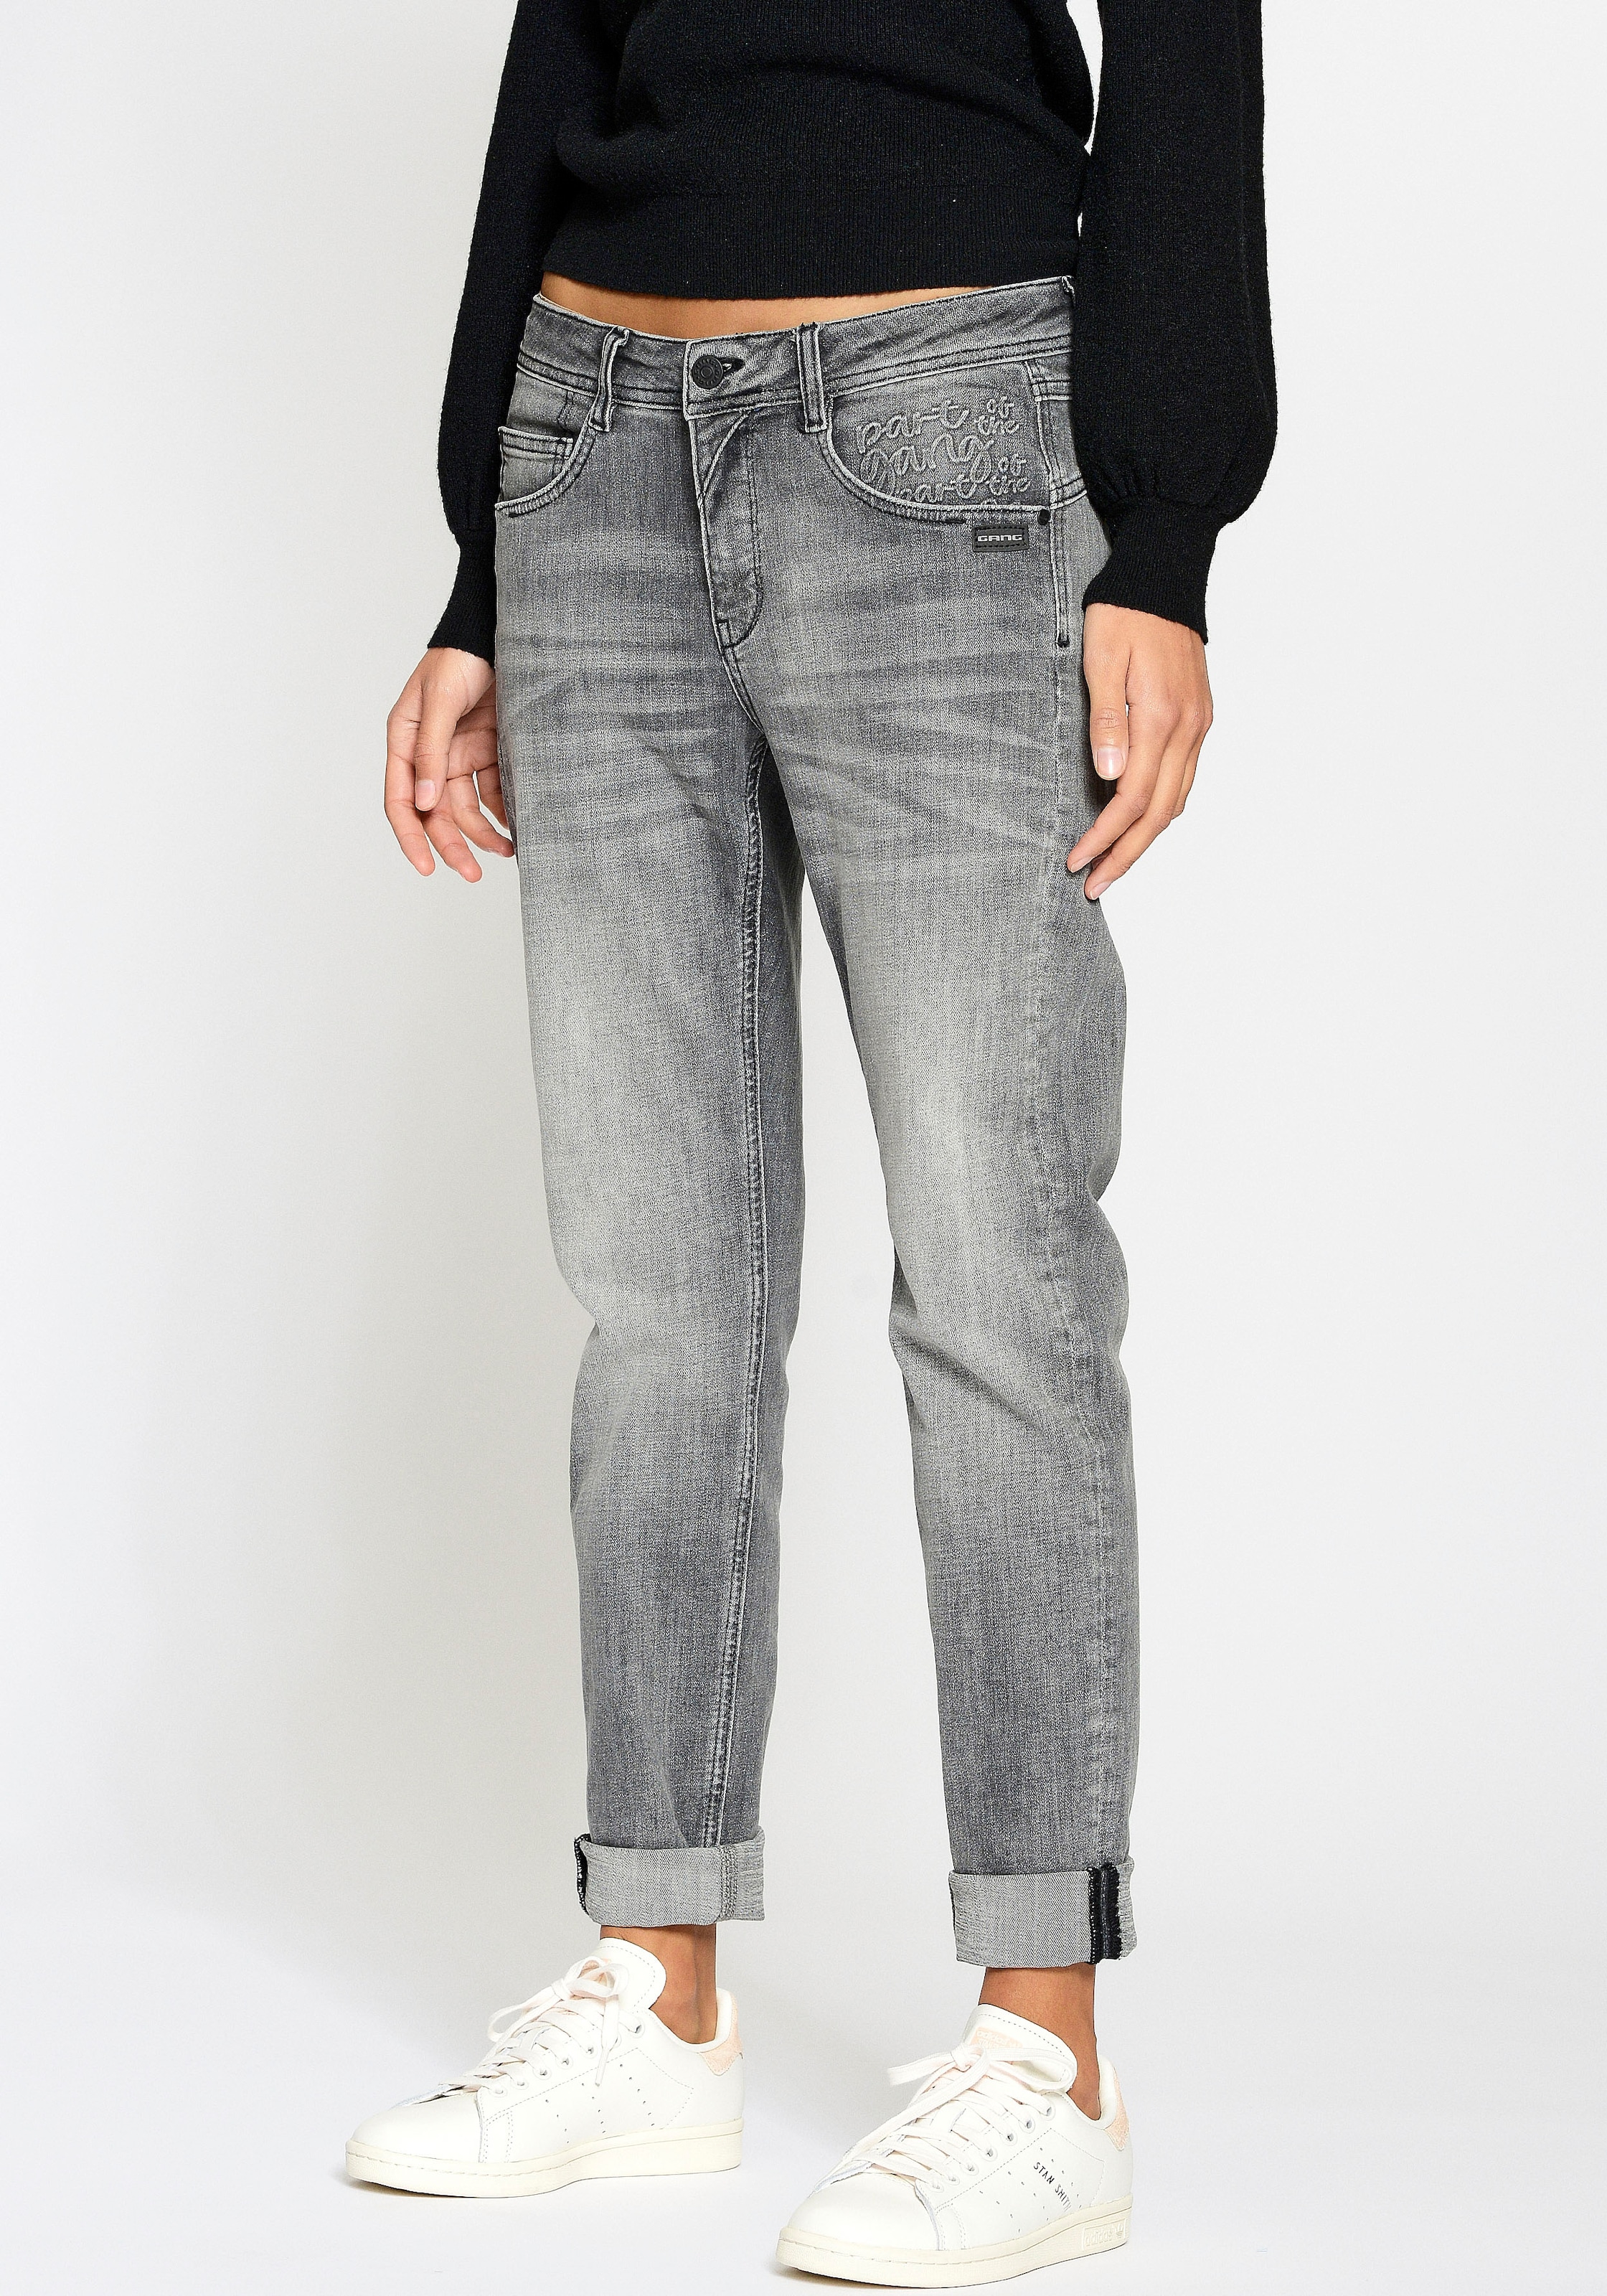 Used-Effekten OTTO im mit Relax-fit-Jeans Relaxed GANG Online Shop »94Amelie Fit«,